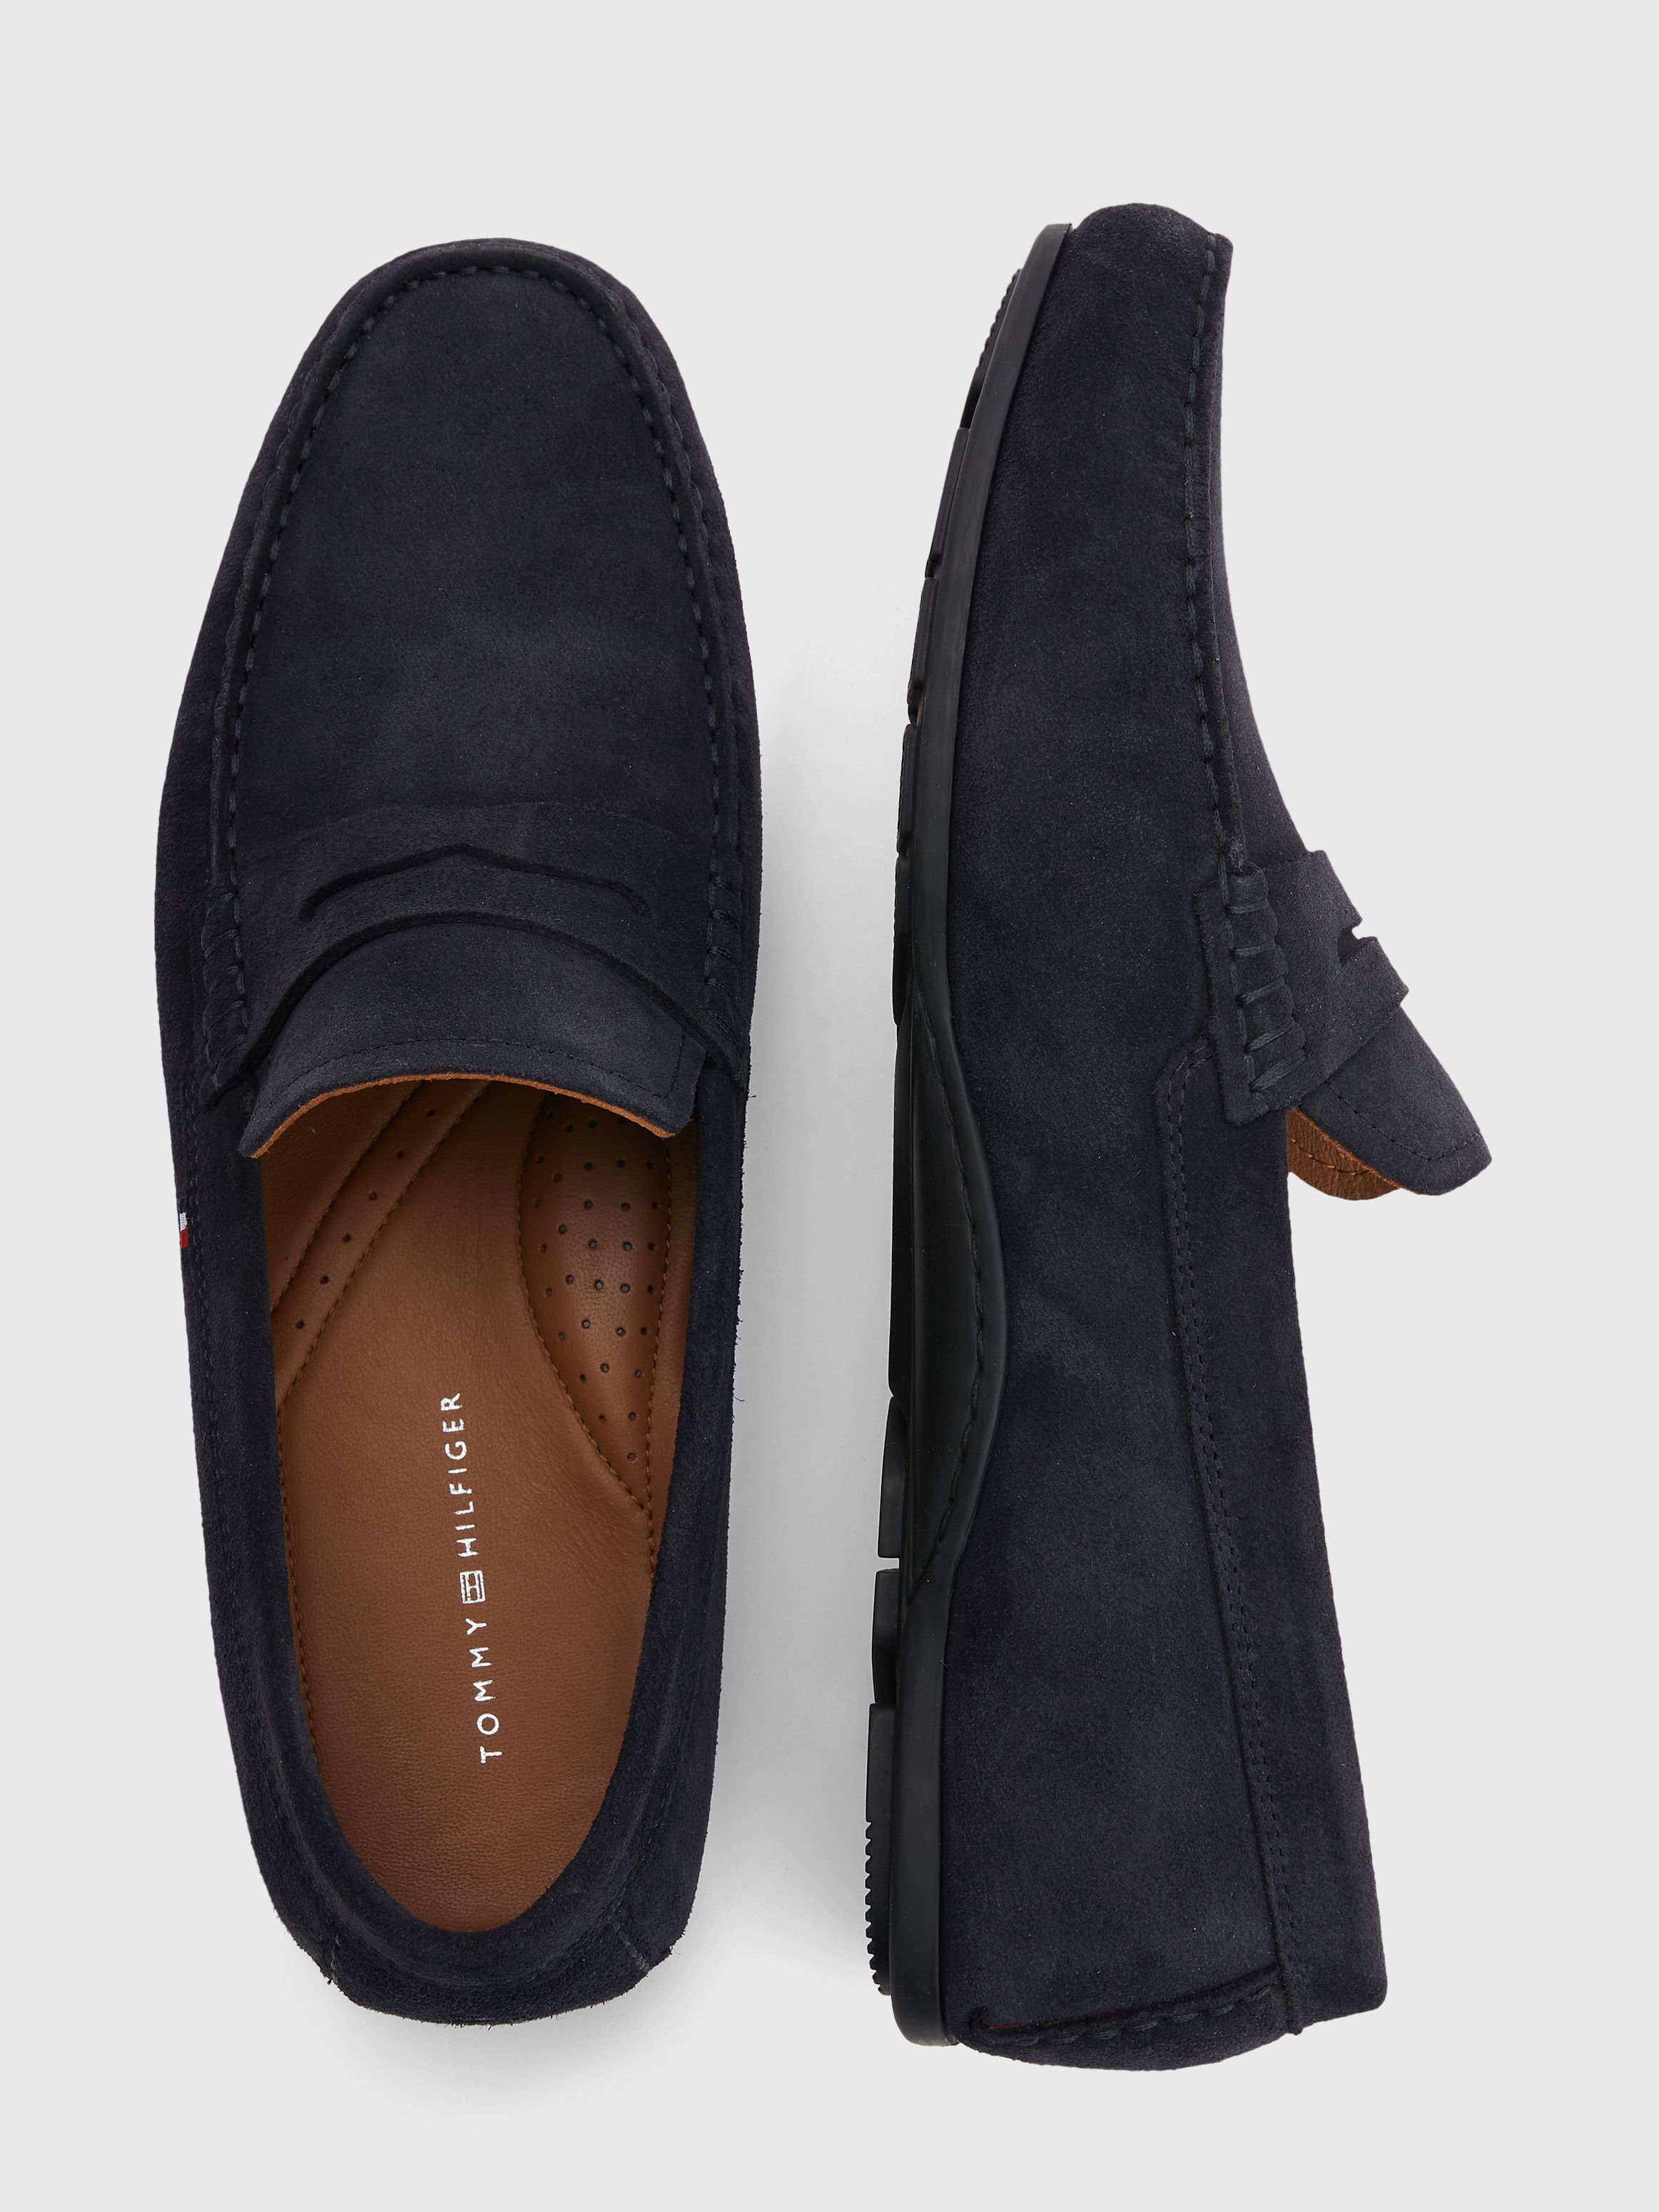 Suede Slip-On Driving Shoes | Tommy Hilfiger